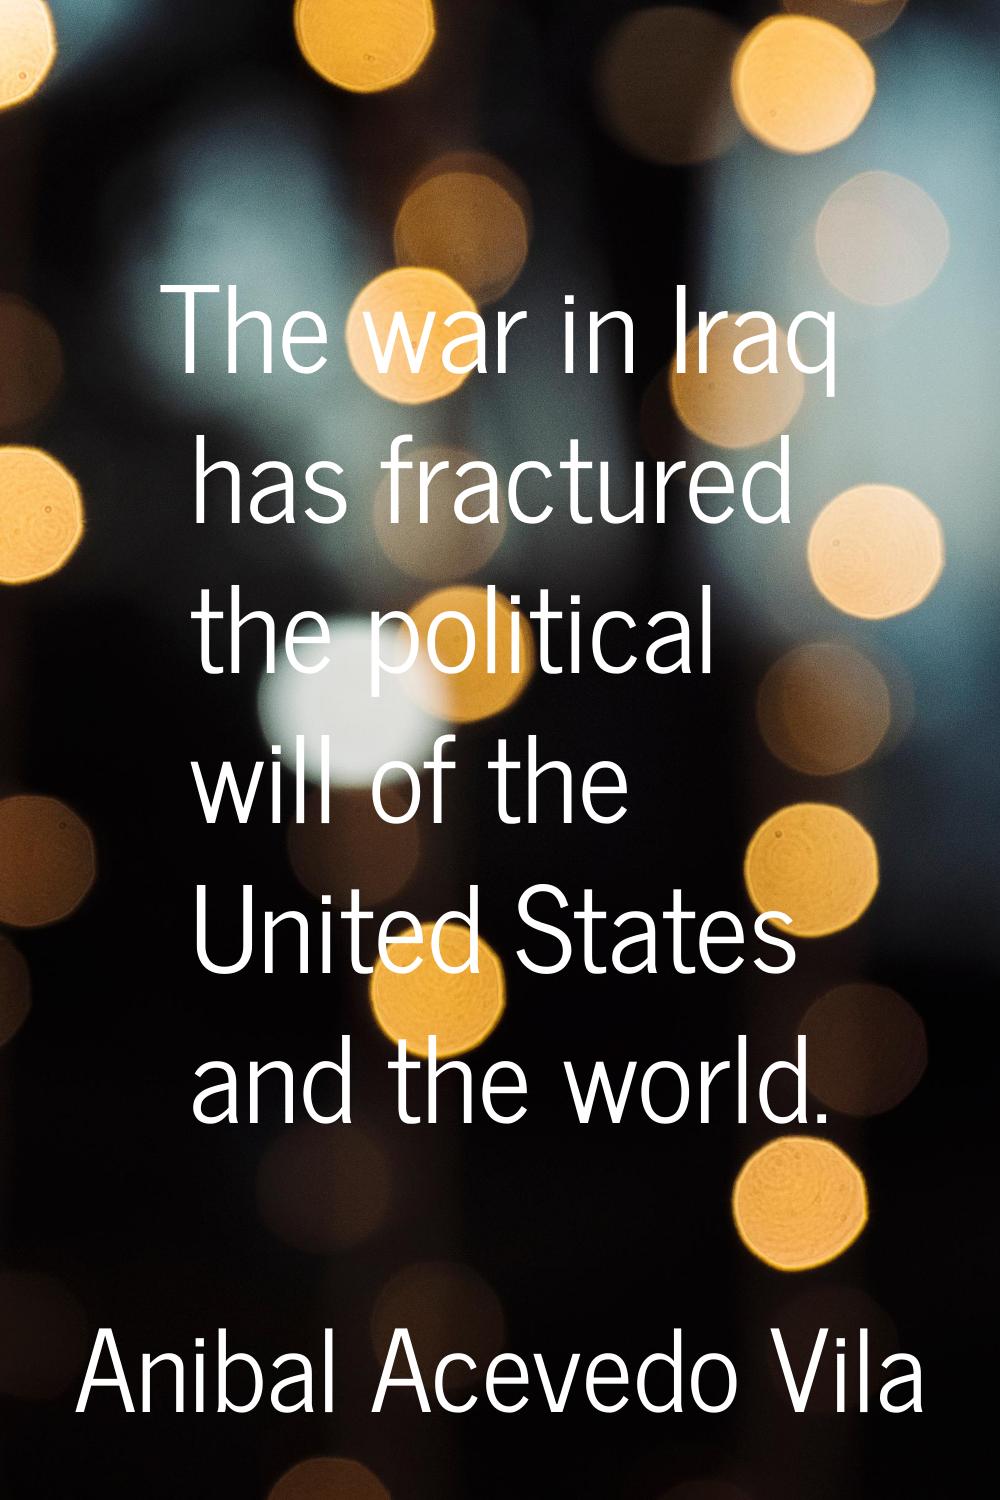 The war in Iraq has fractured the political will of the United States and the world.